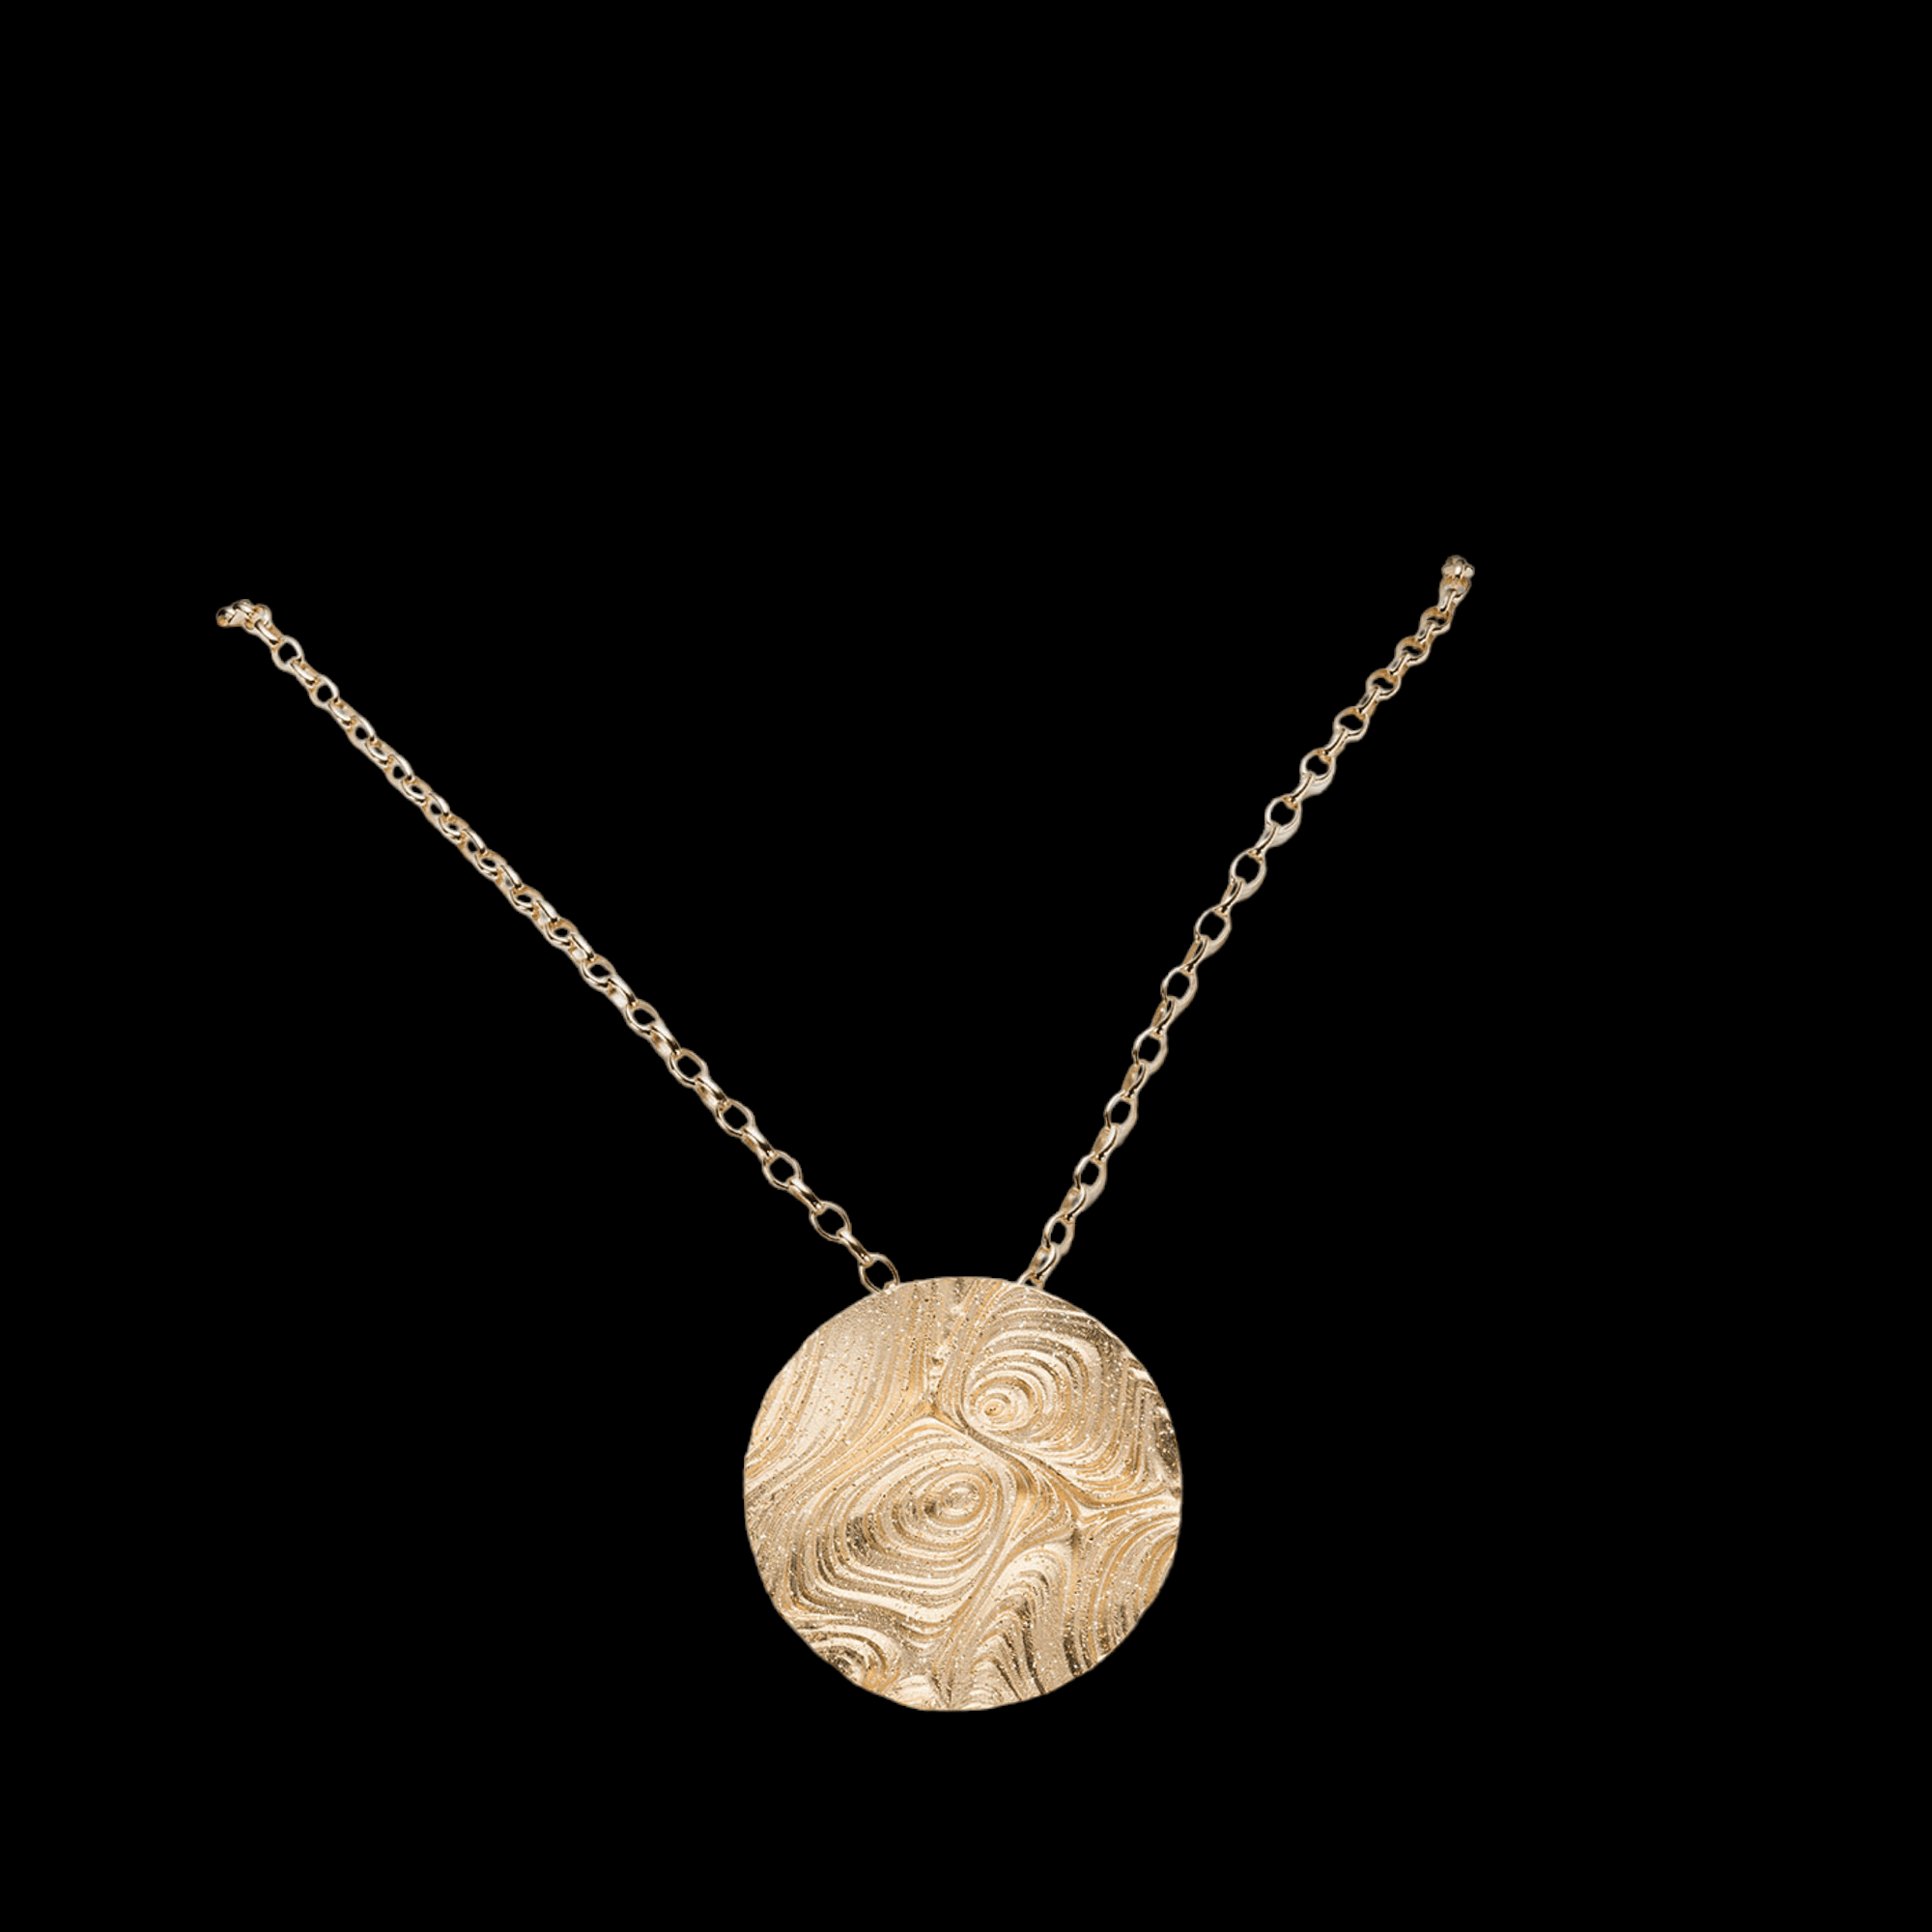 Small round gold plated pendant